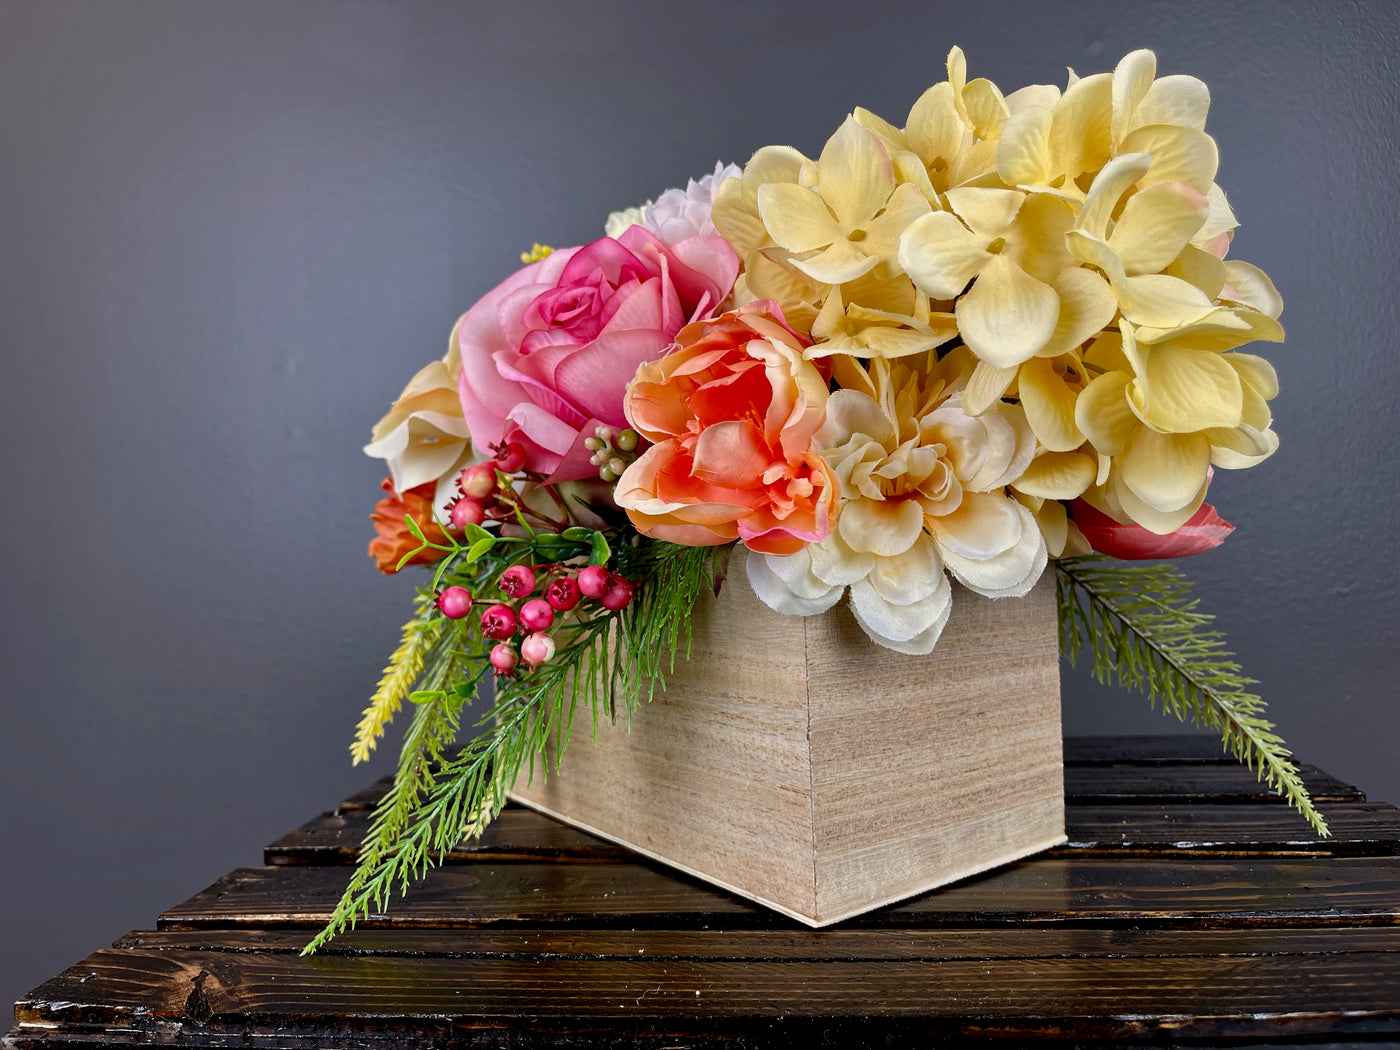 Invite the colorful array of a summer sunset  inside with this bright centrepiece. Large pink and yellow peony blossoms open gracefully next to custard hydrangeas, peach English roses, white globe dahlia, kicky craspedia, and yellow hypericum berries cascading alongside bright green fern. Placed in a lacquered pine box (L8”x W4”x H4”).